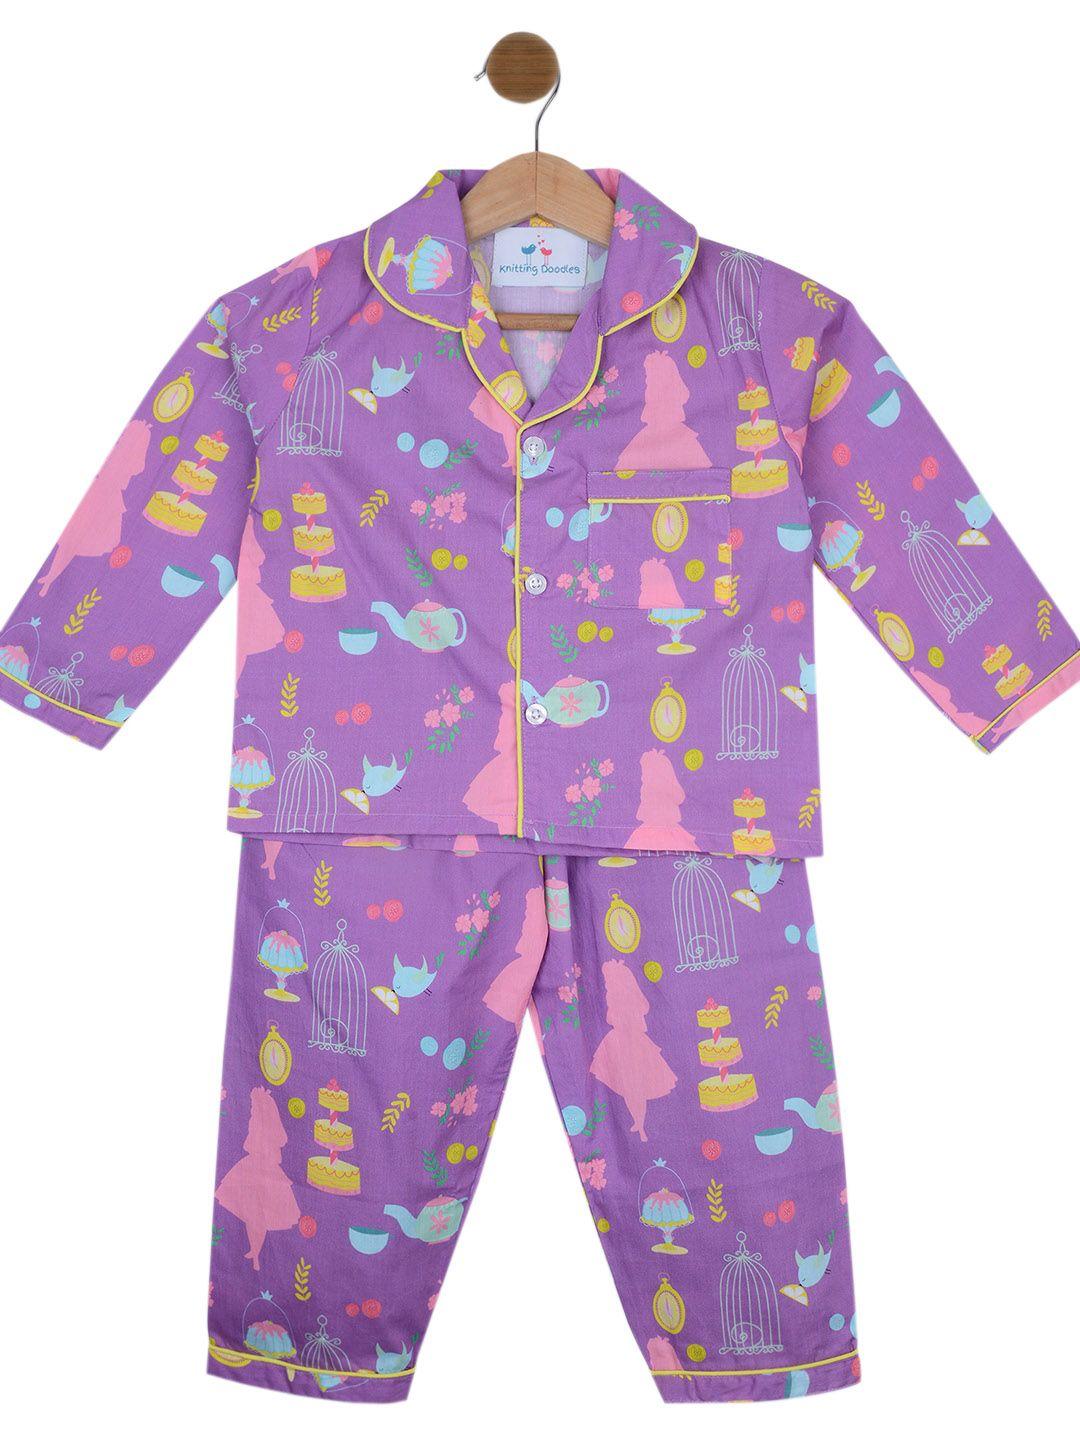 knitting doodles kids purple & pink printed pure cotton night suit